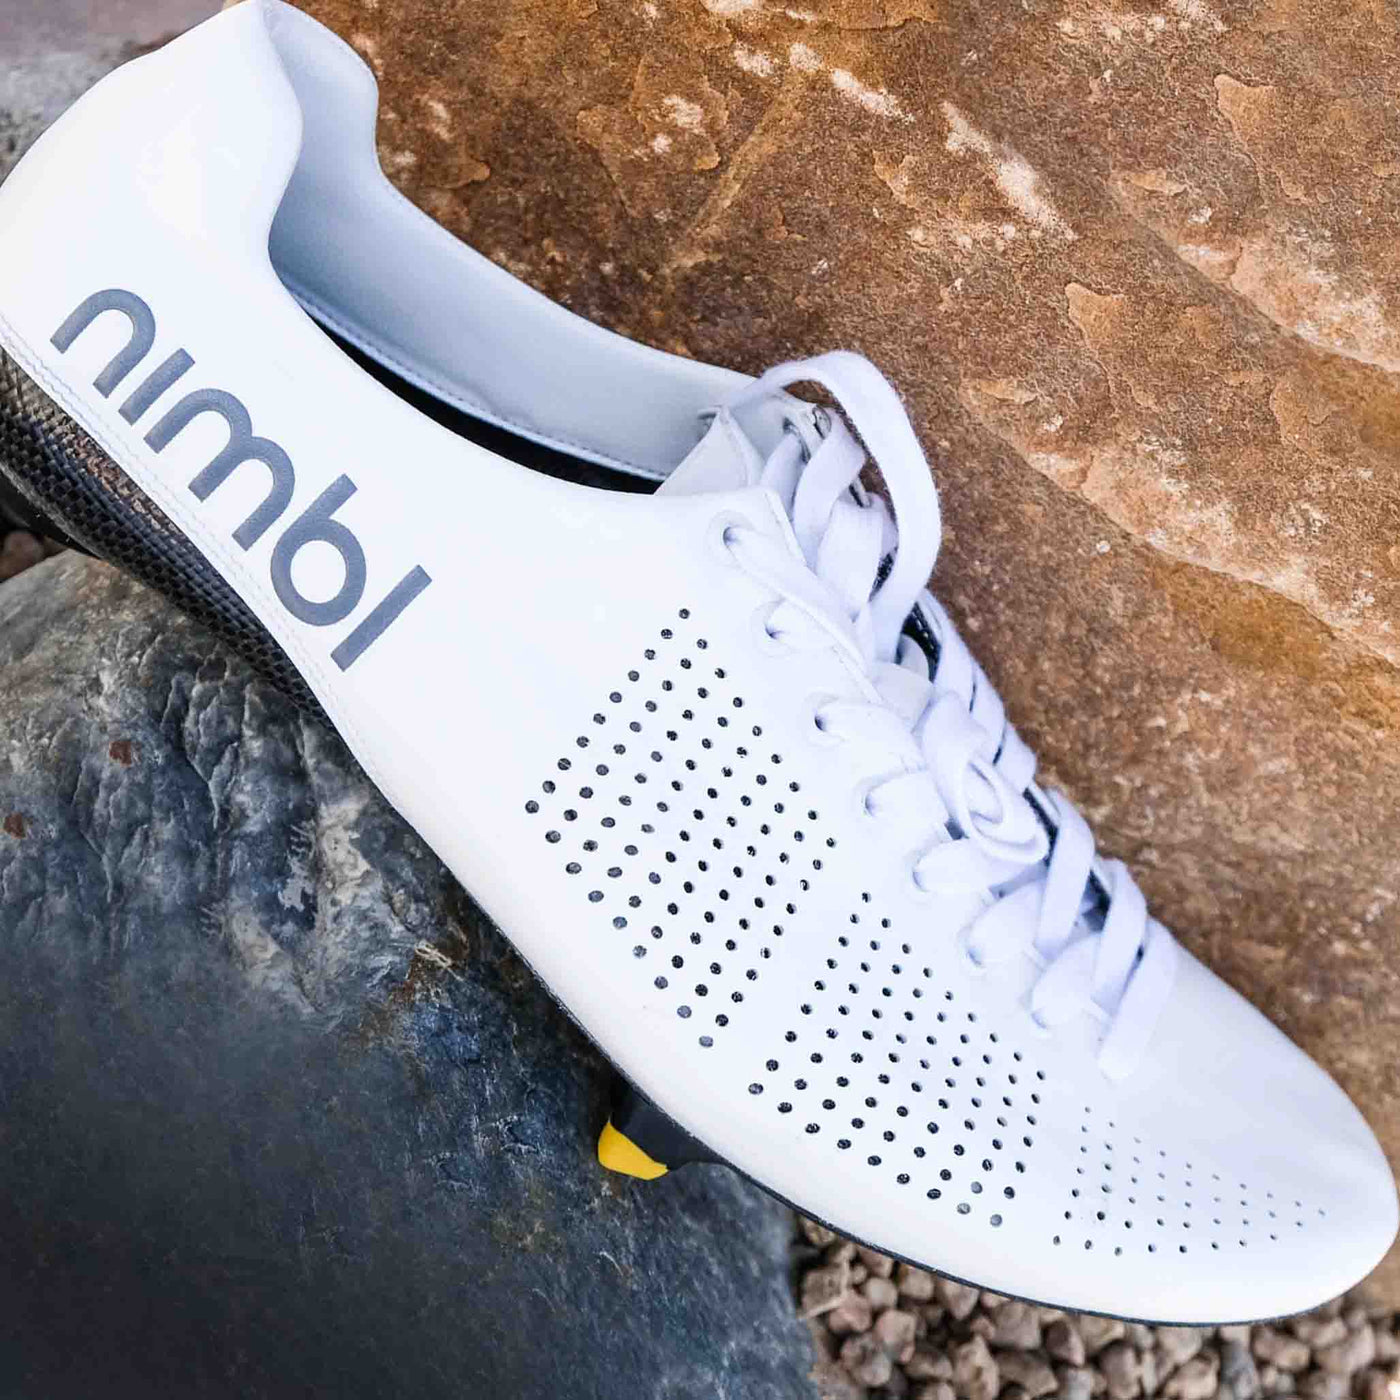 Road Gravel cycling shoes BOA lace carbon sole premium racing road shoe collection from Northwave, Nimbl and Shimano